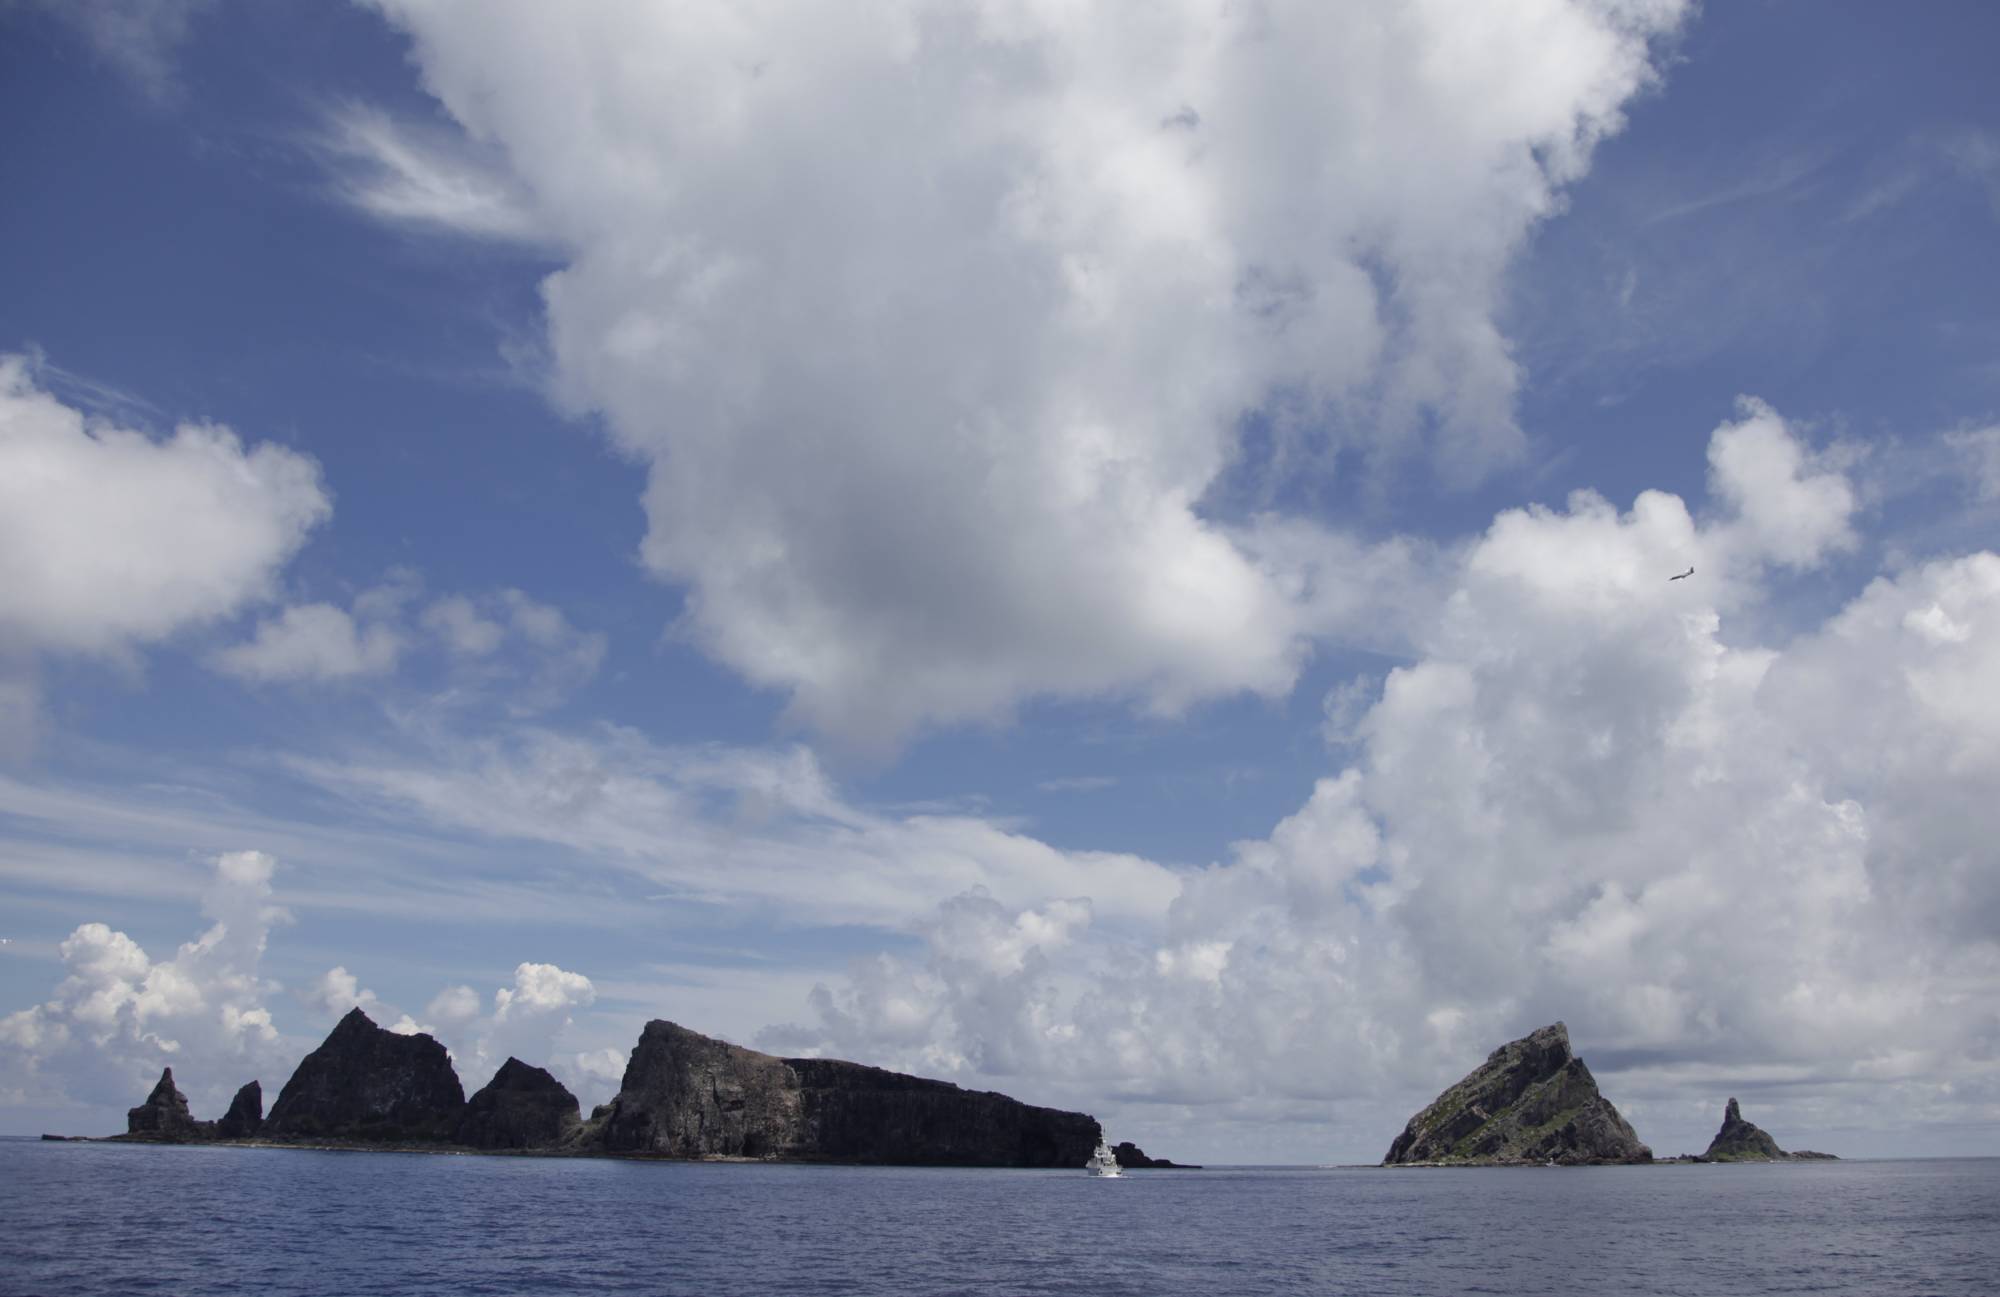 The disputed Senkaku islands, known as the Diaoyu in China, in the East China Sea in September 2, 2012. | REUTERS